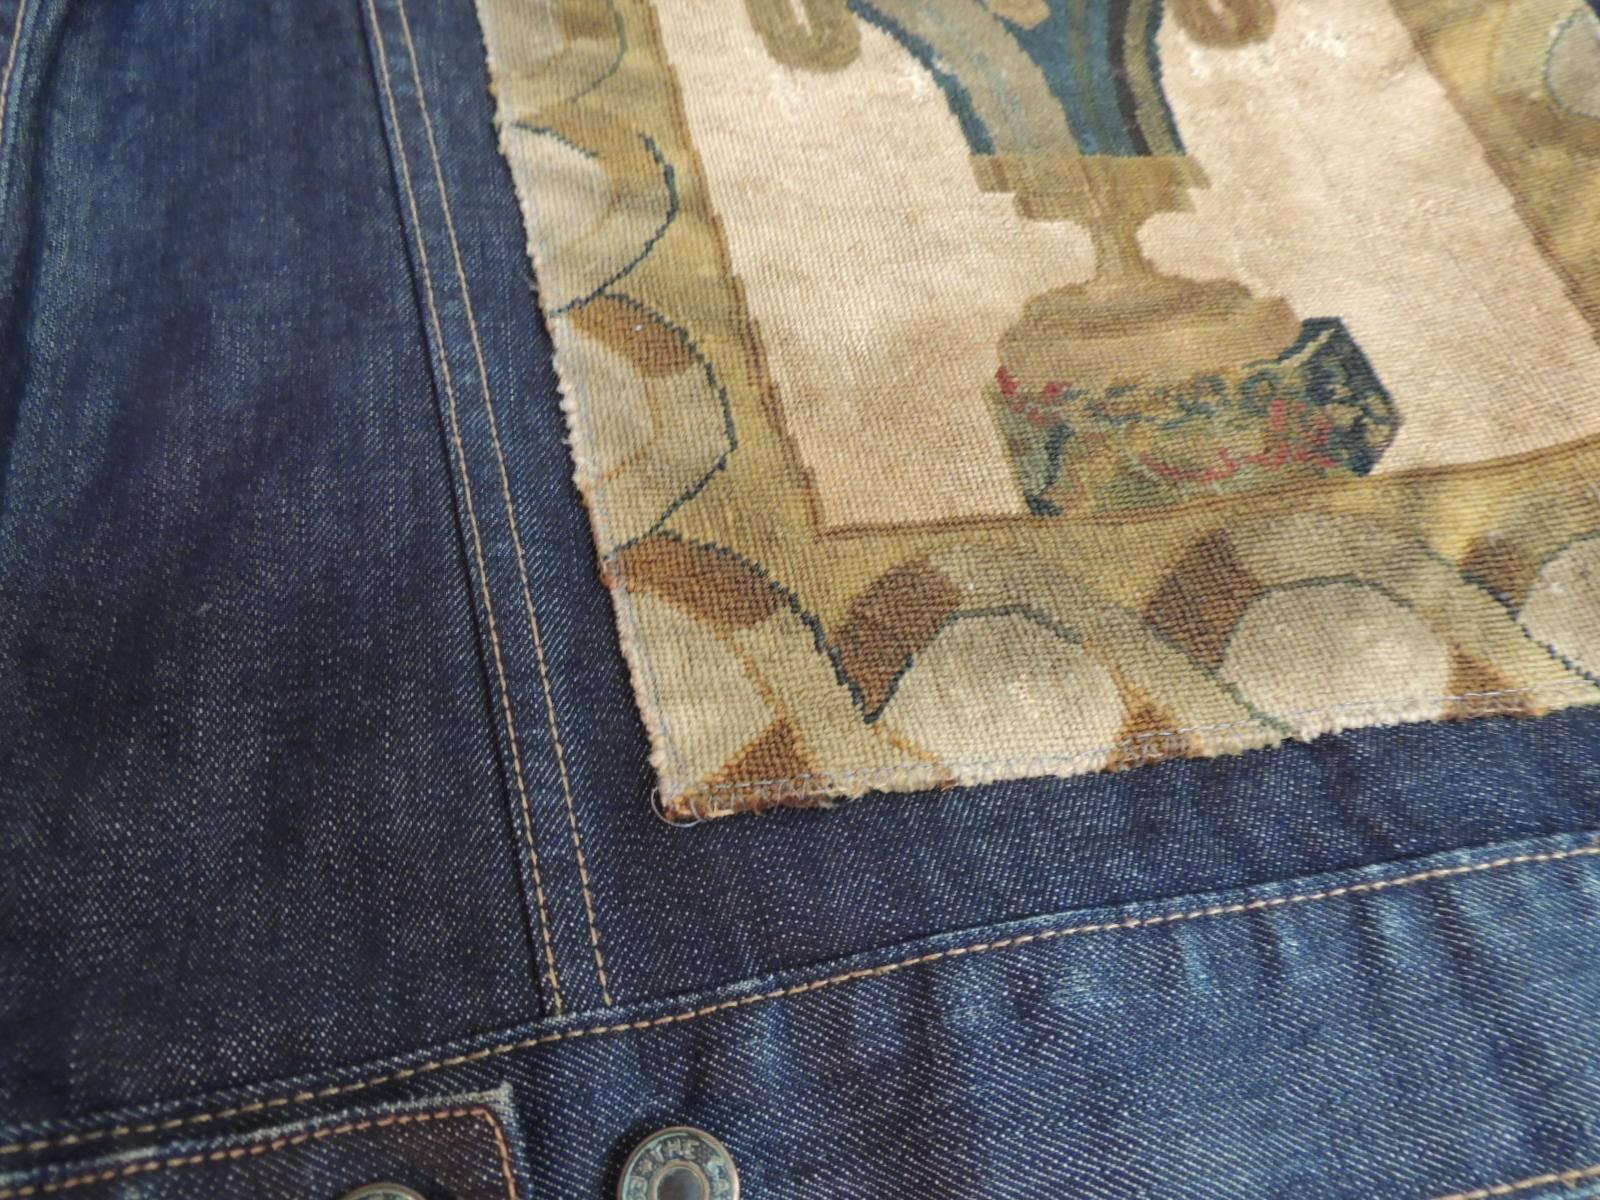 Hand-Crafted A.T.G. Custom Denim Jacket with a 19th Century Inset Aubusson Tapestry Panel